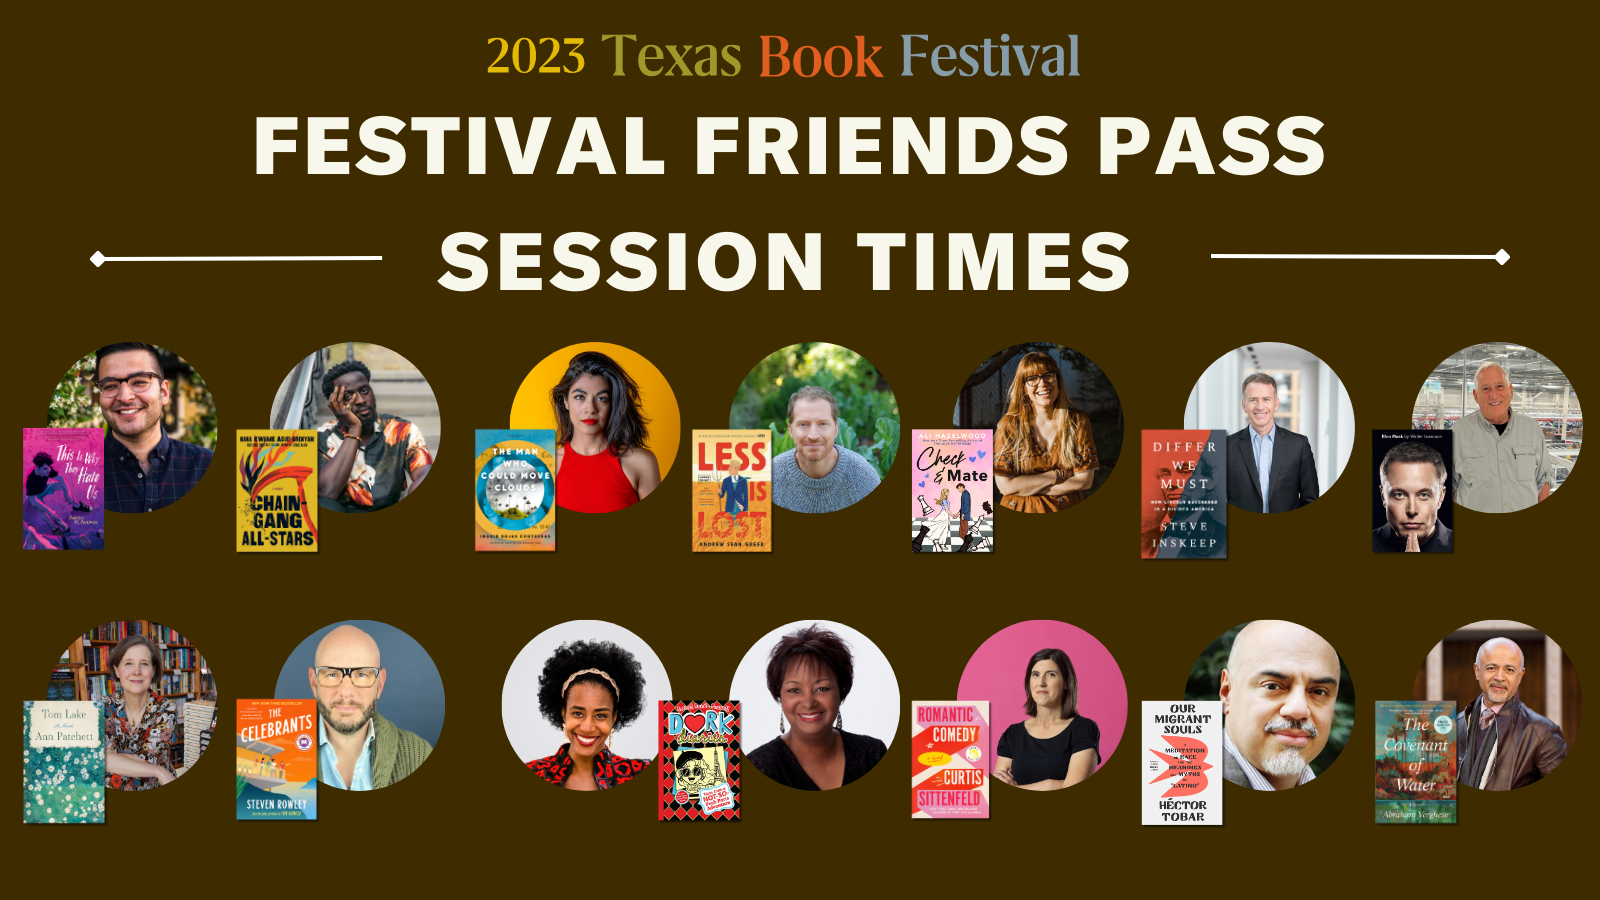 Festival Friends Pass Session Times